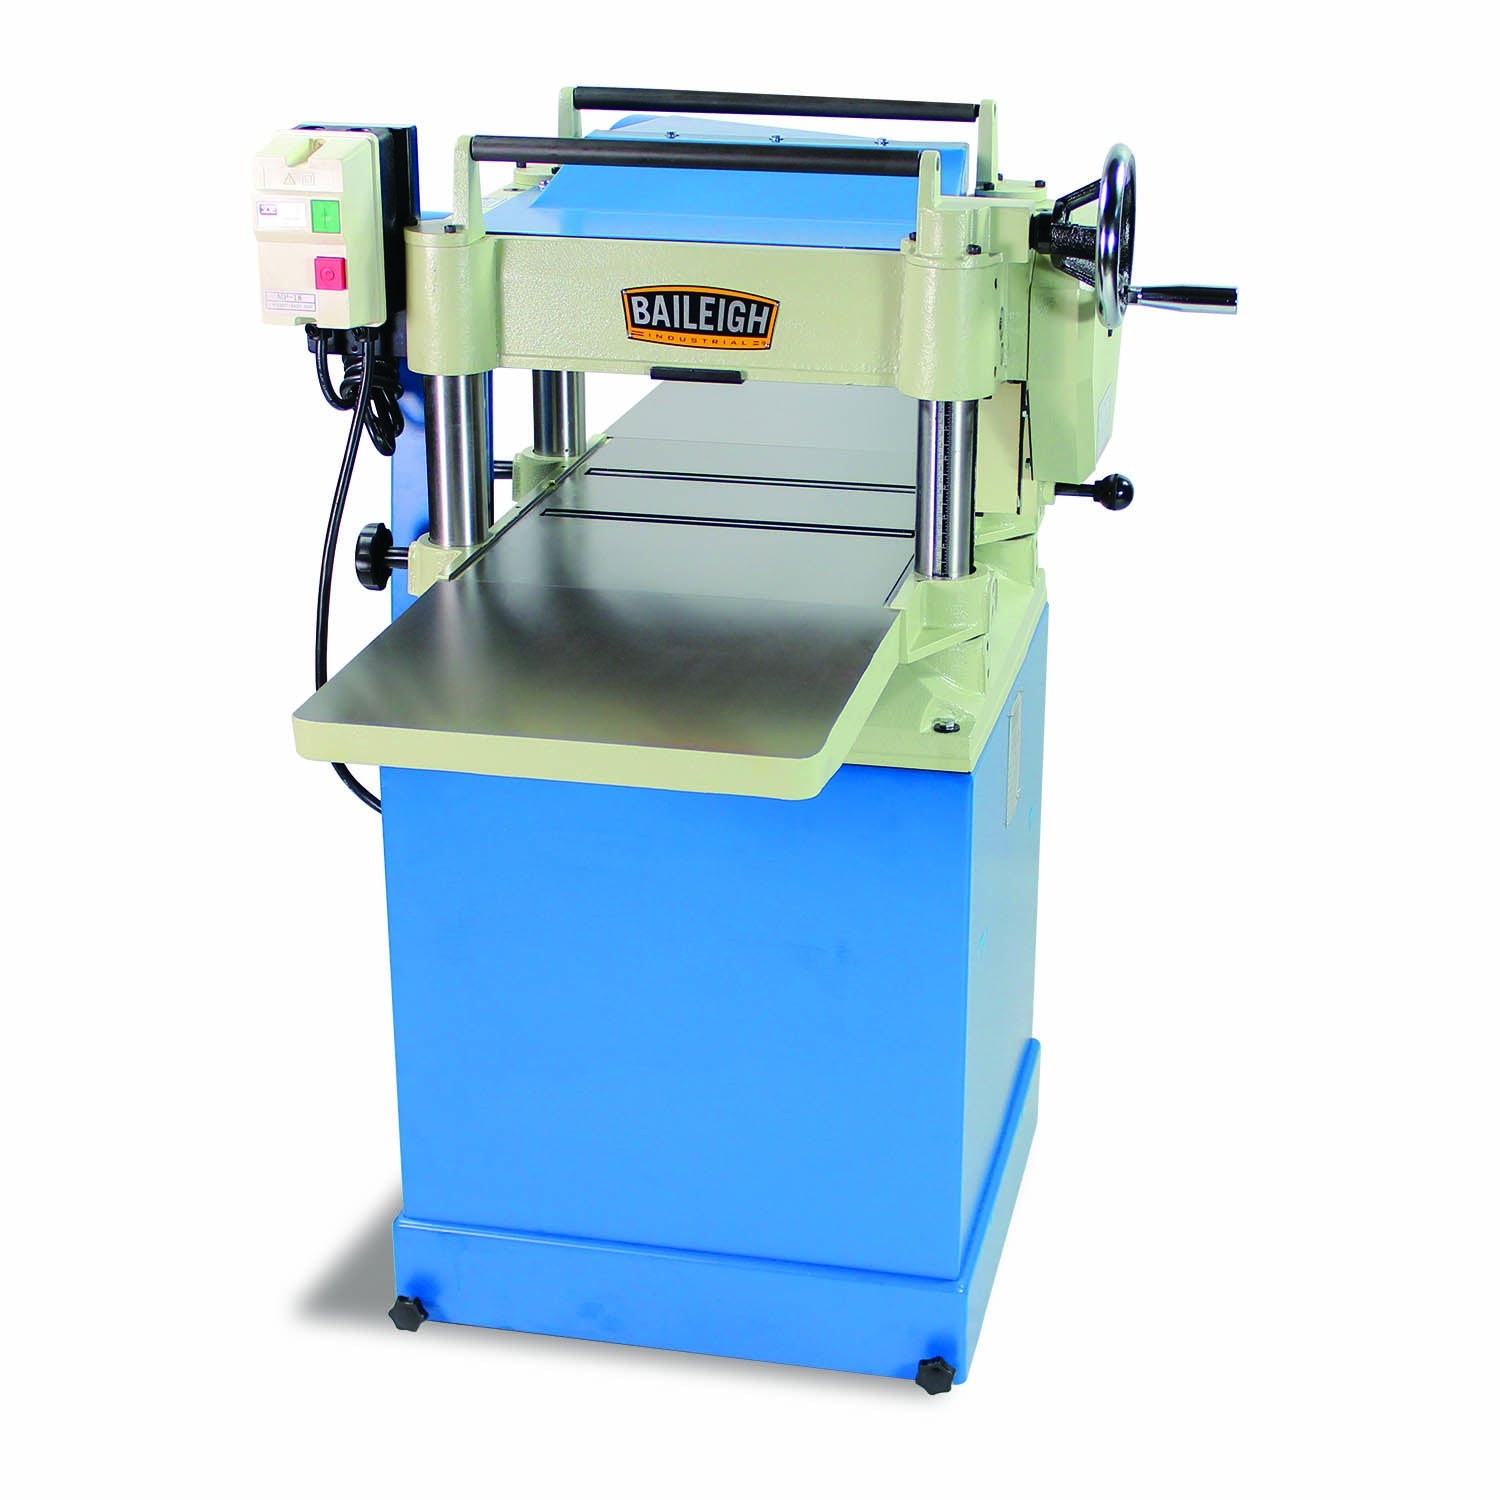 Baileigh IP-156-HH 220V 1 Phase 3HP 15" Industrial Planer w/ Helical Insert Head, 6" Maximum Cutting Height